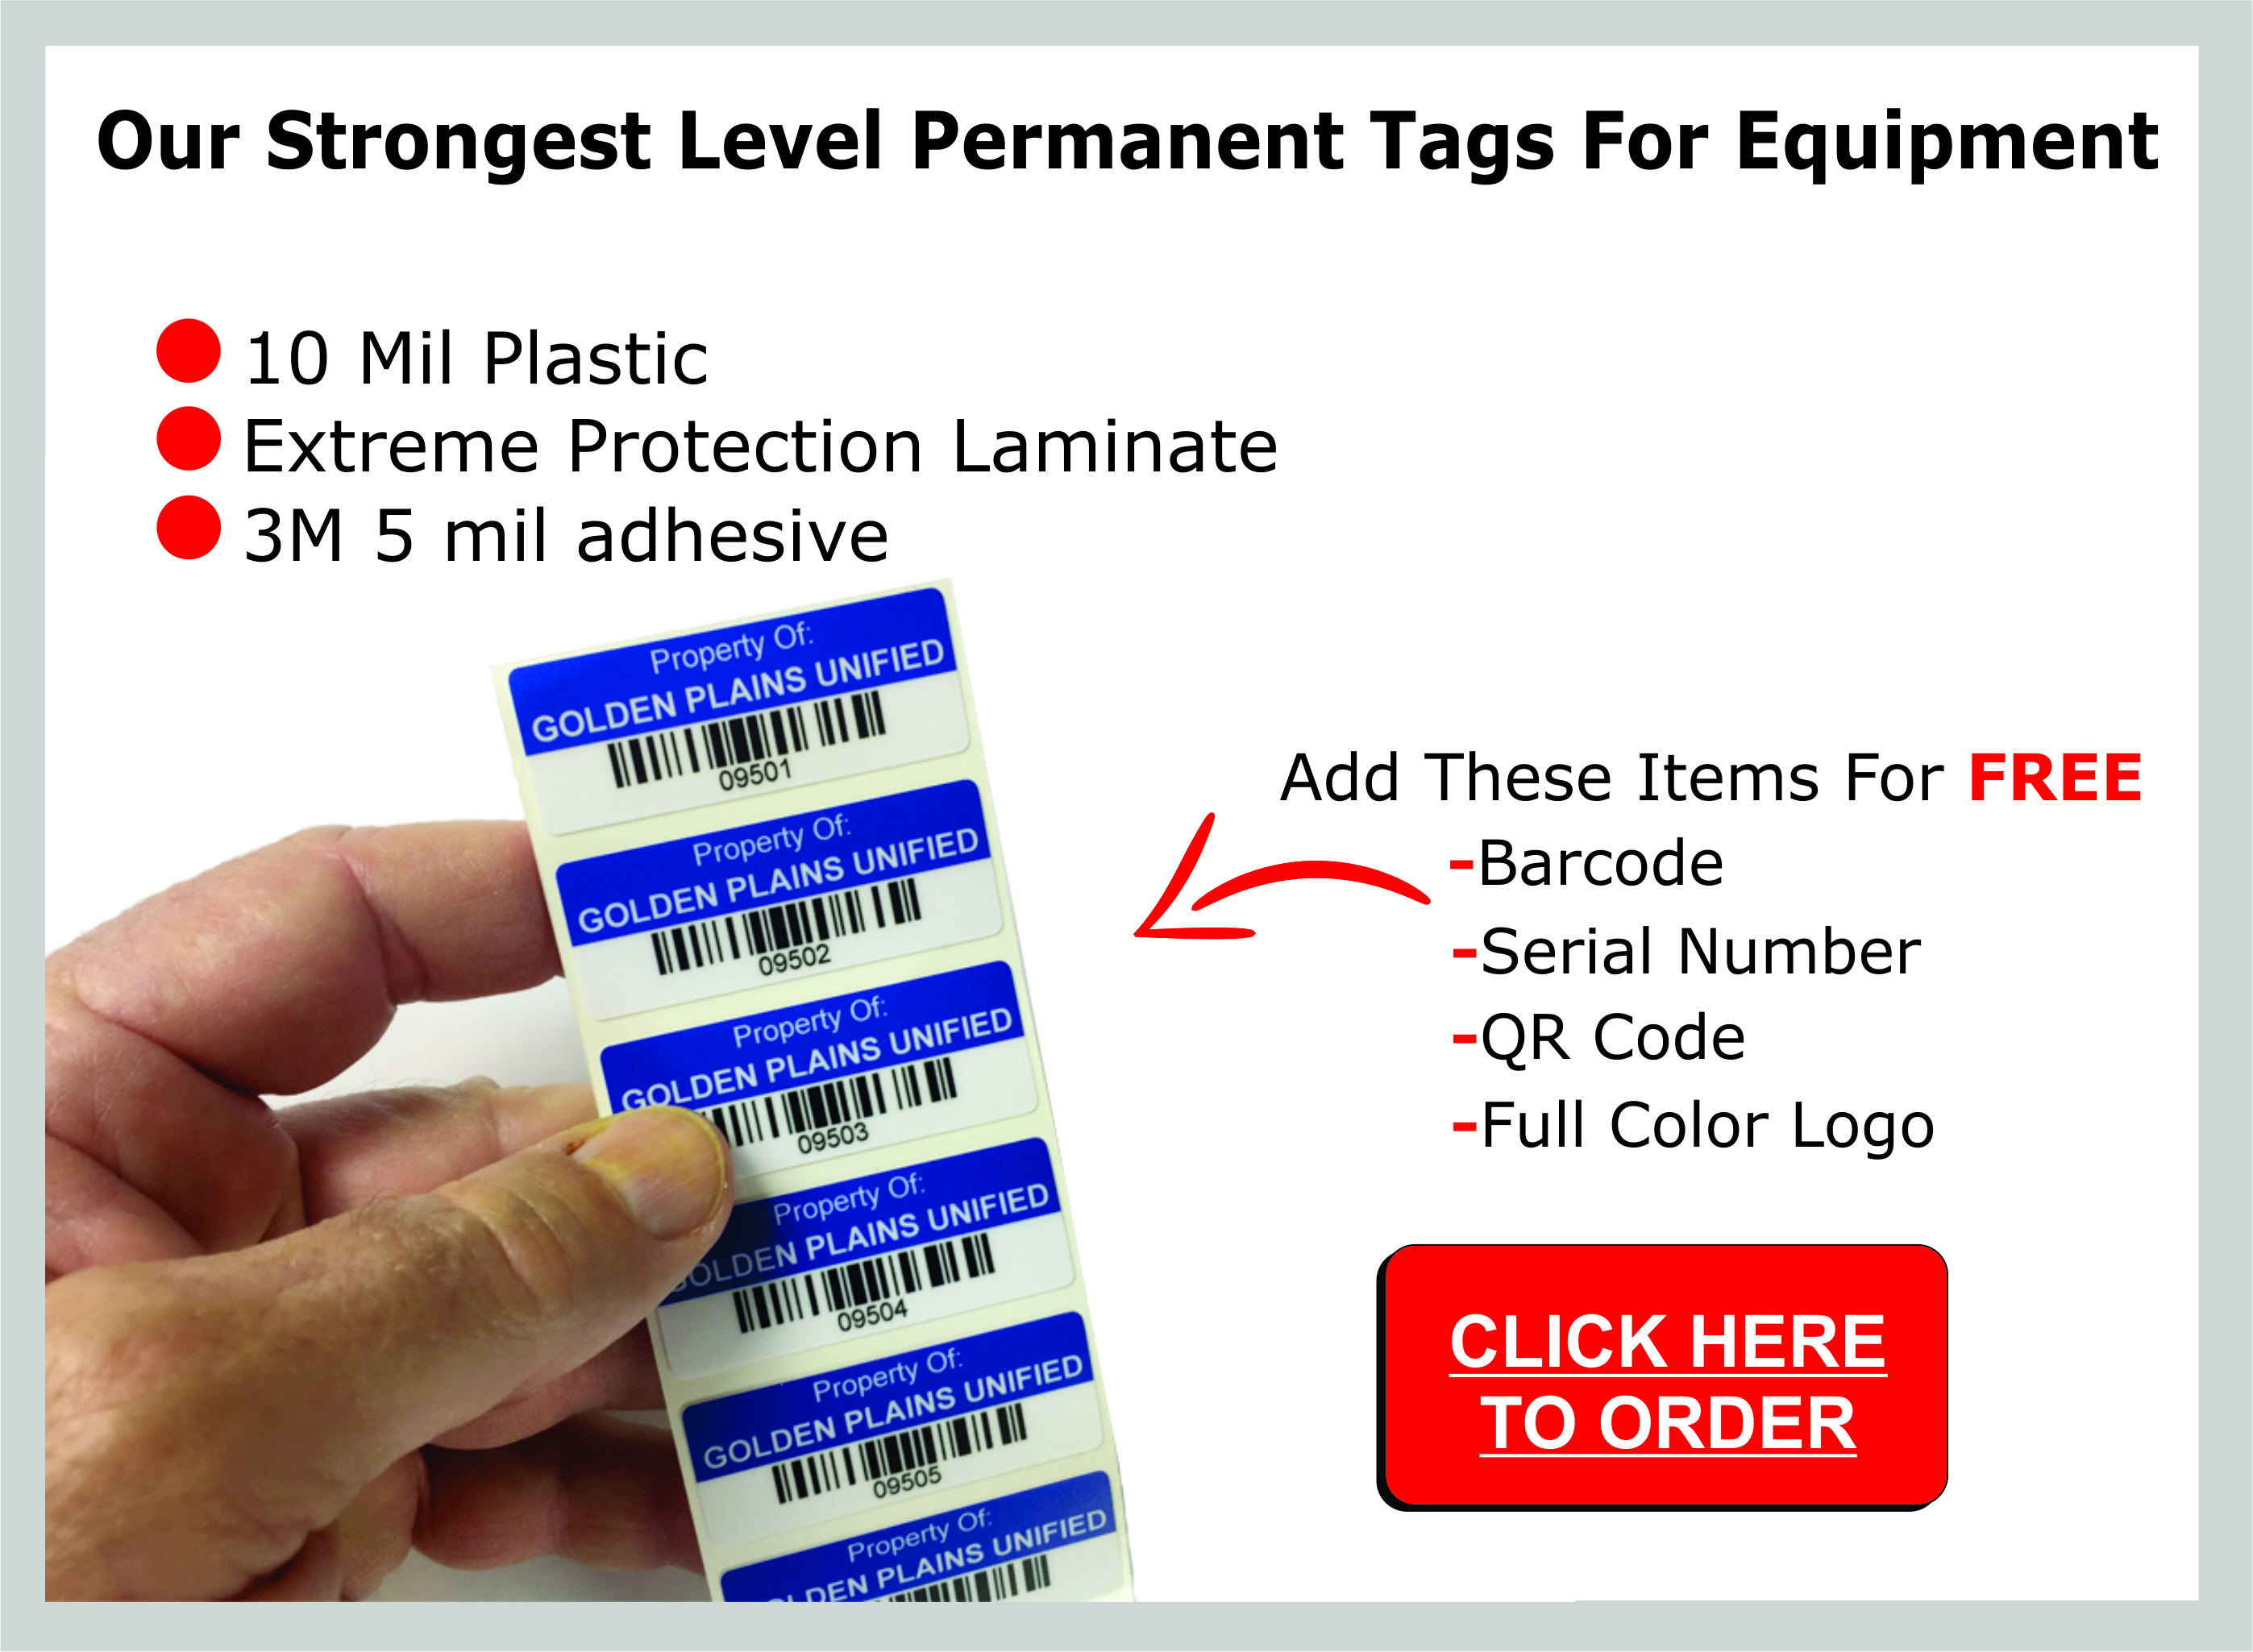 these are our strongest level of Permanent Tags For Equipment